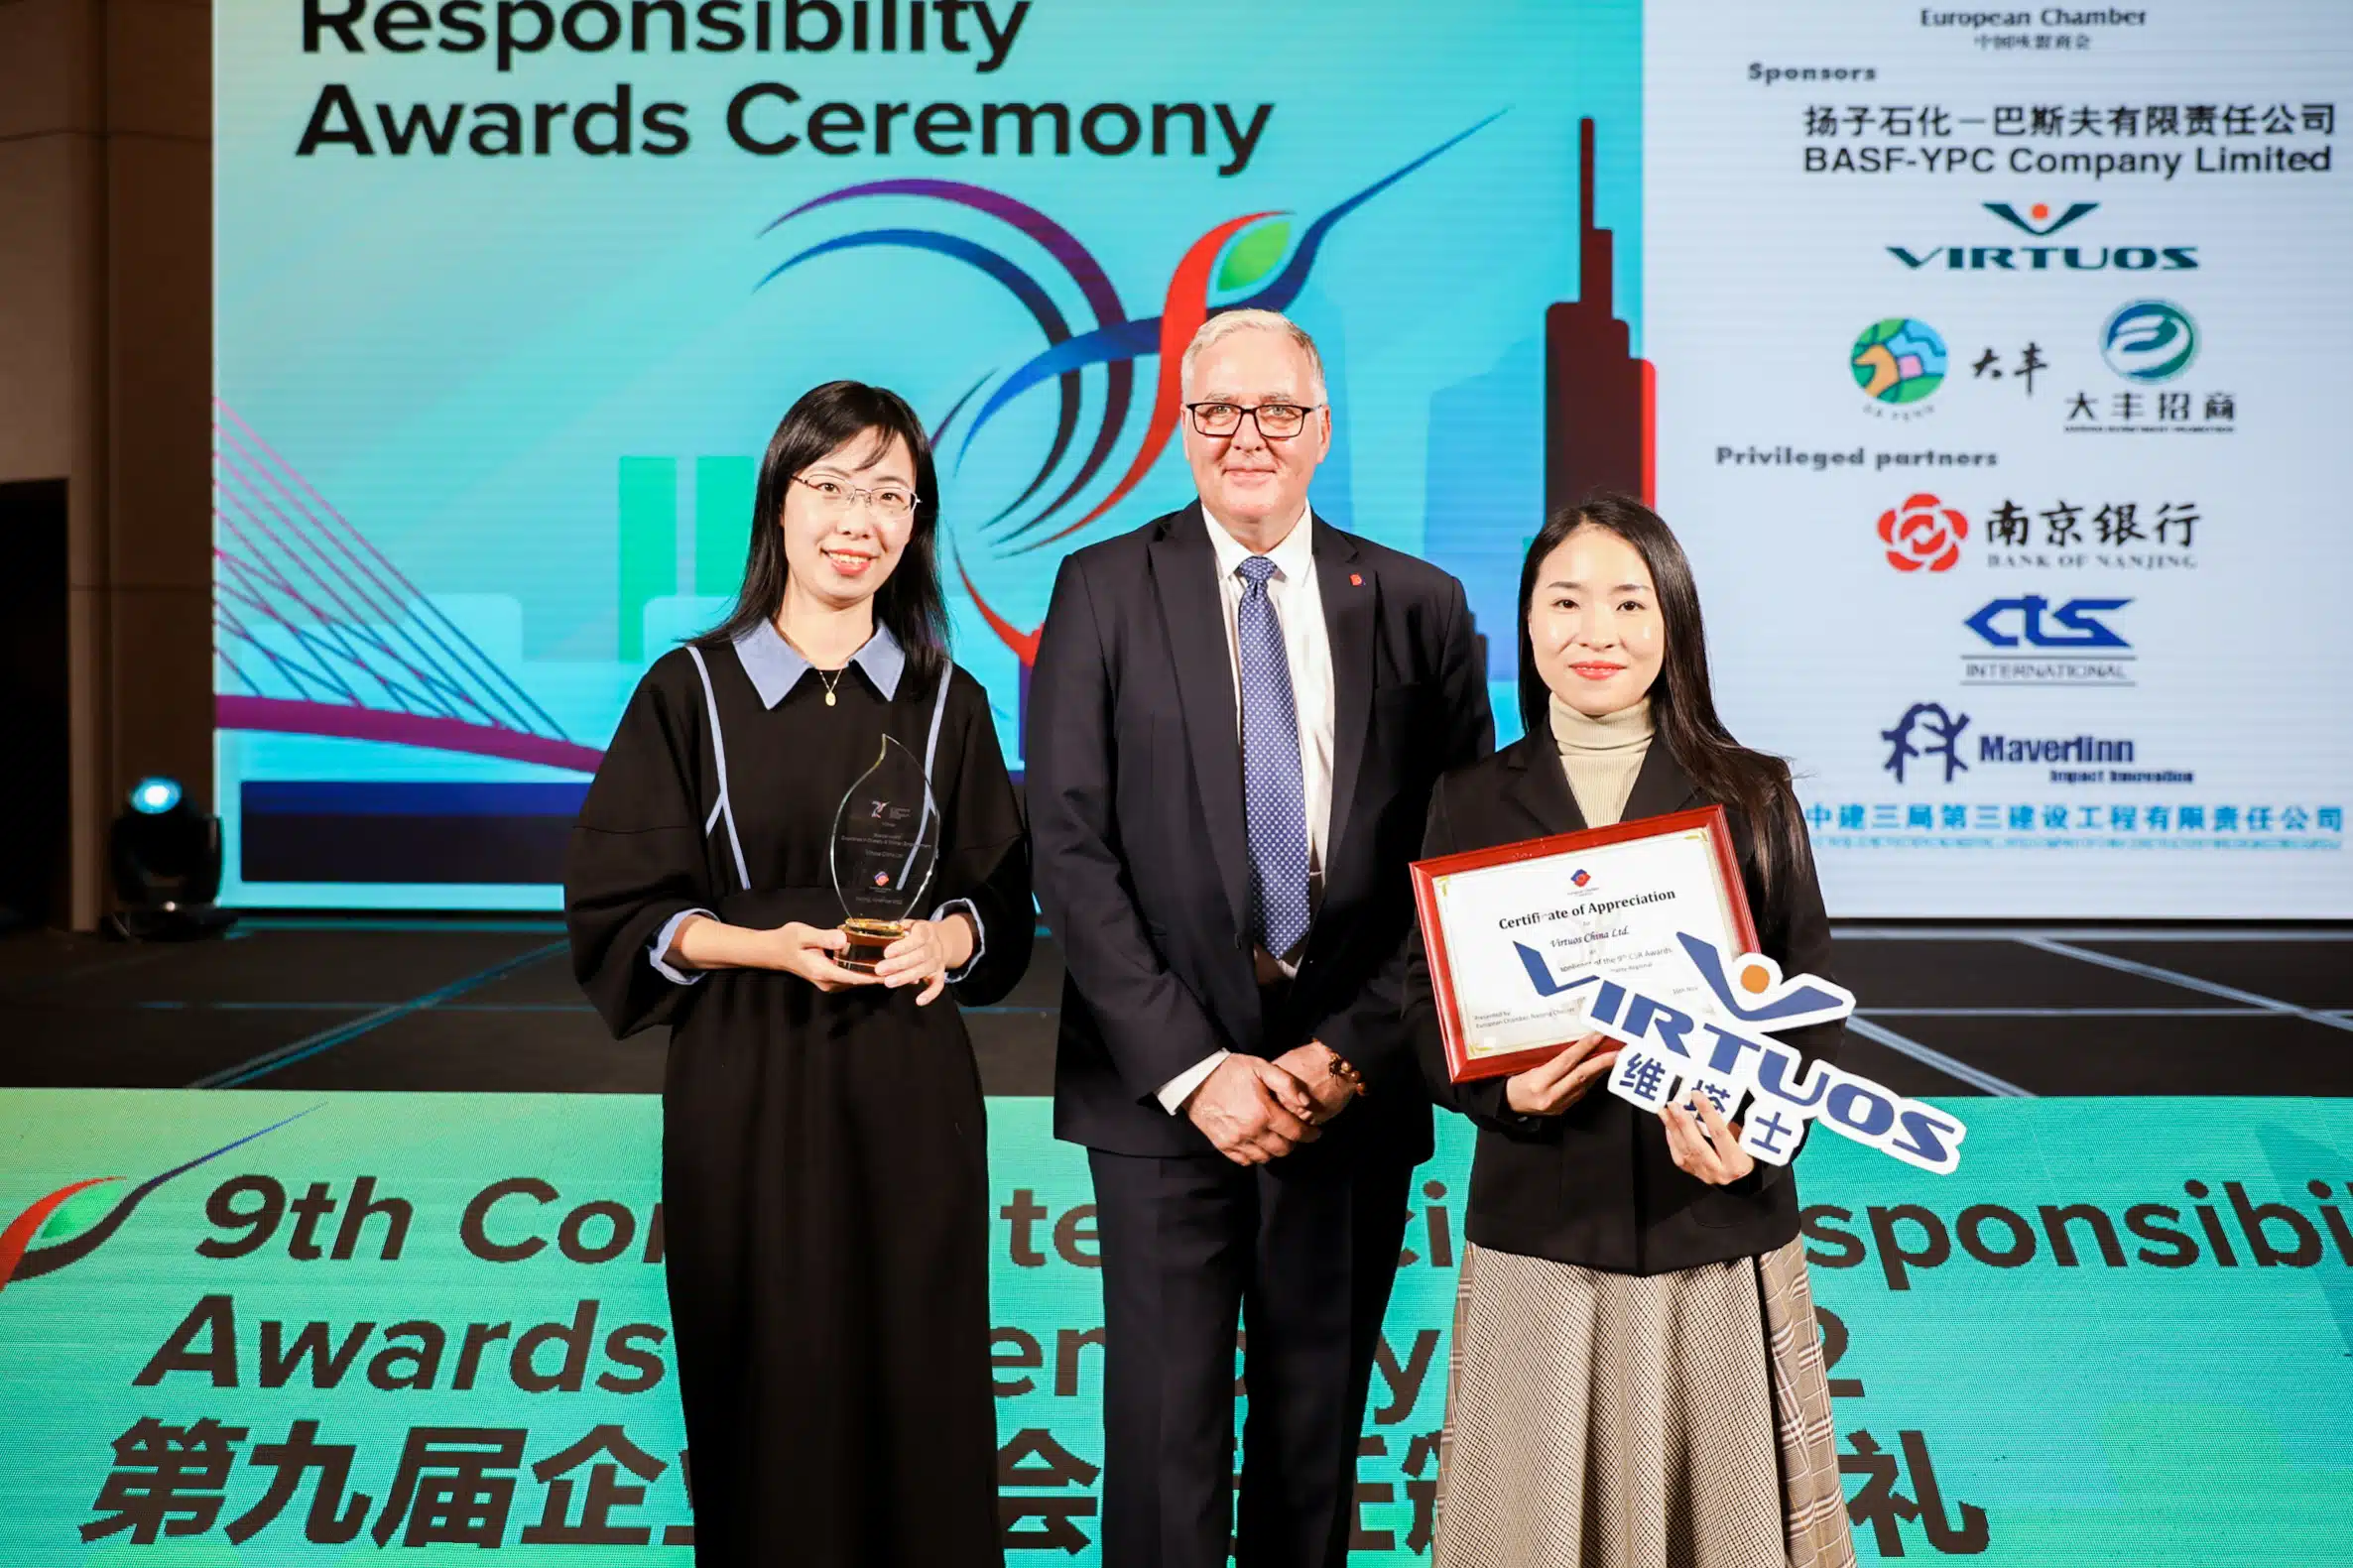 Virtuos awarded “Excellence in Diversity & Women Empowerment” 2022 by the European Union Chamber of Commerce in China